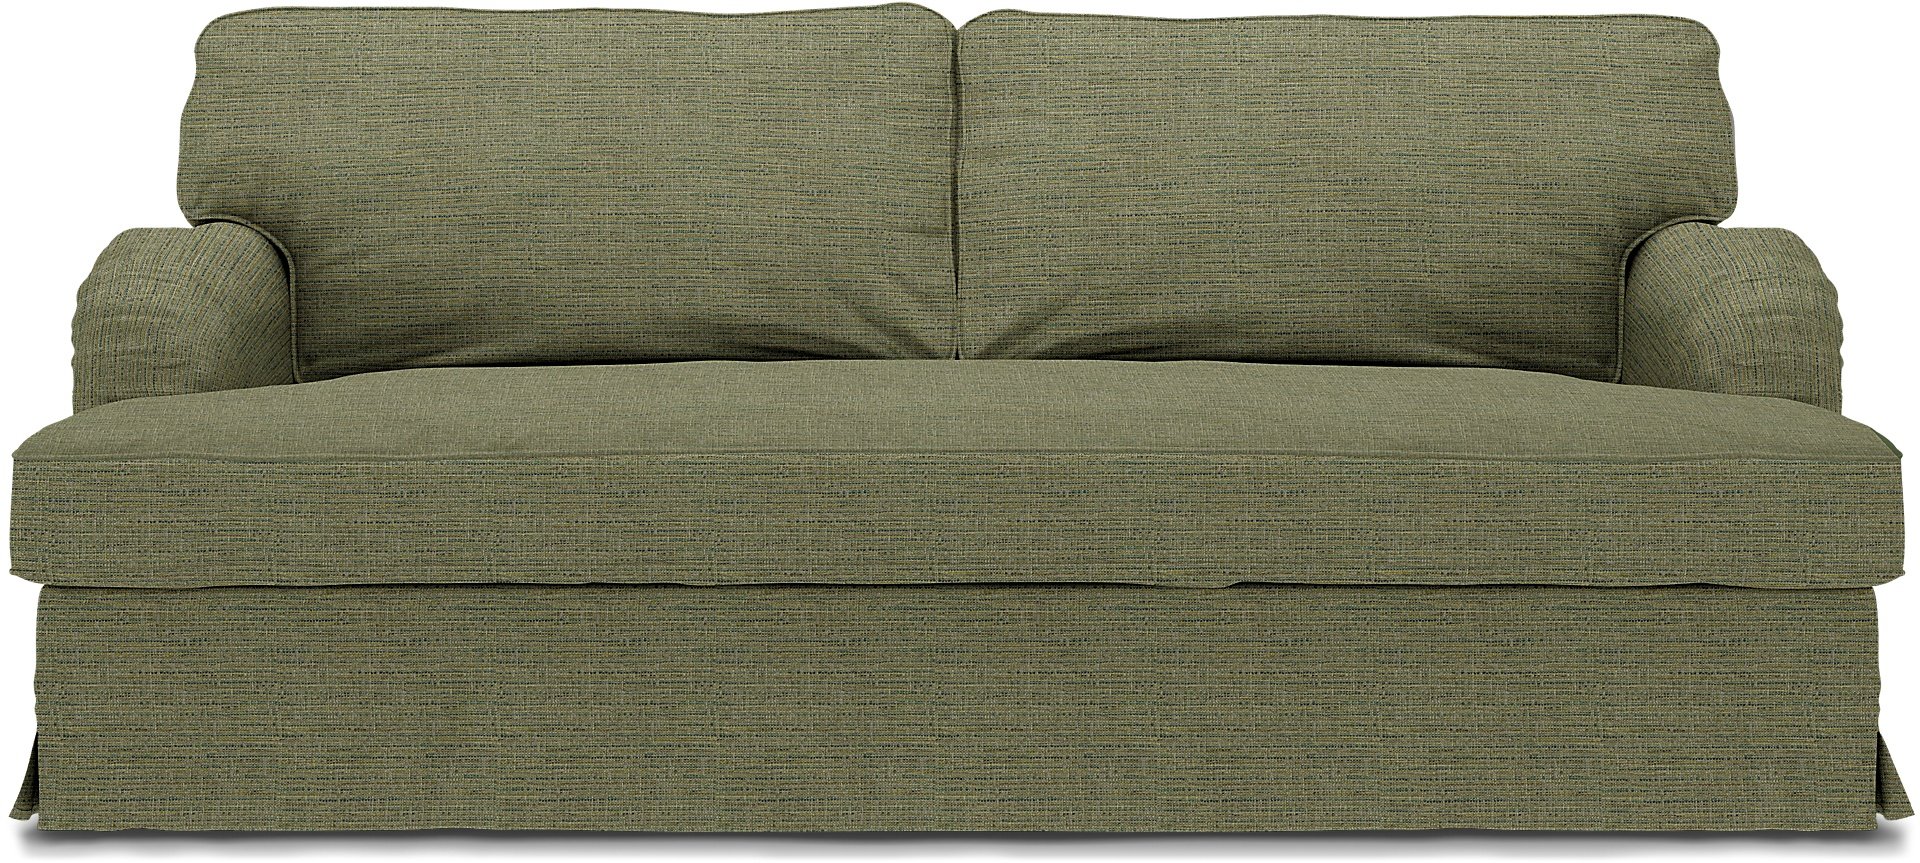 Stocksund 3 Seater Sofa Cover, Meadow Green, Boucle & Texture - Bemz